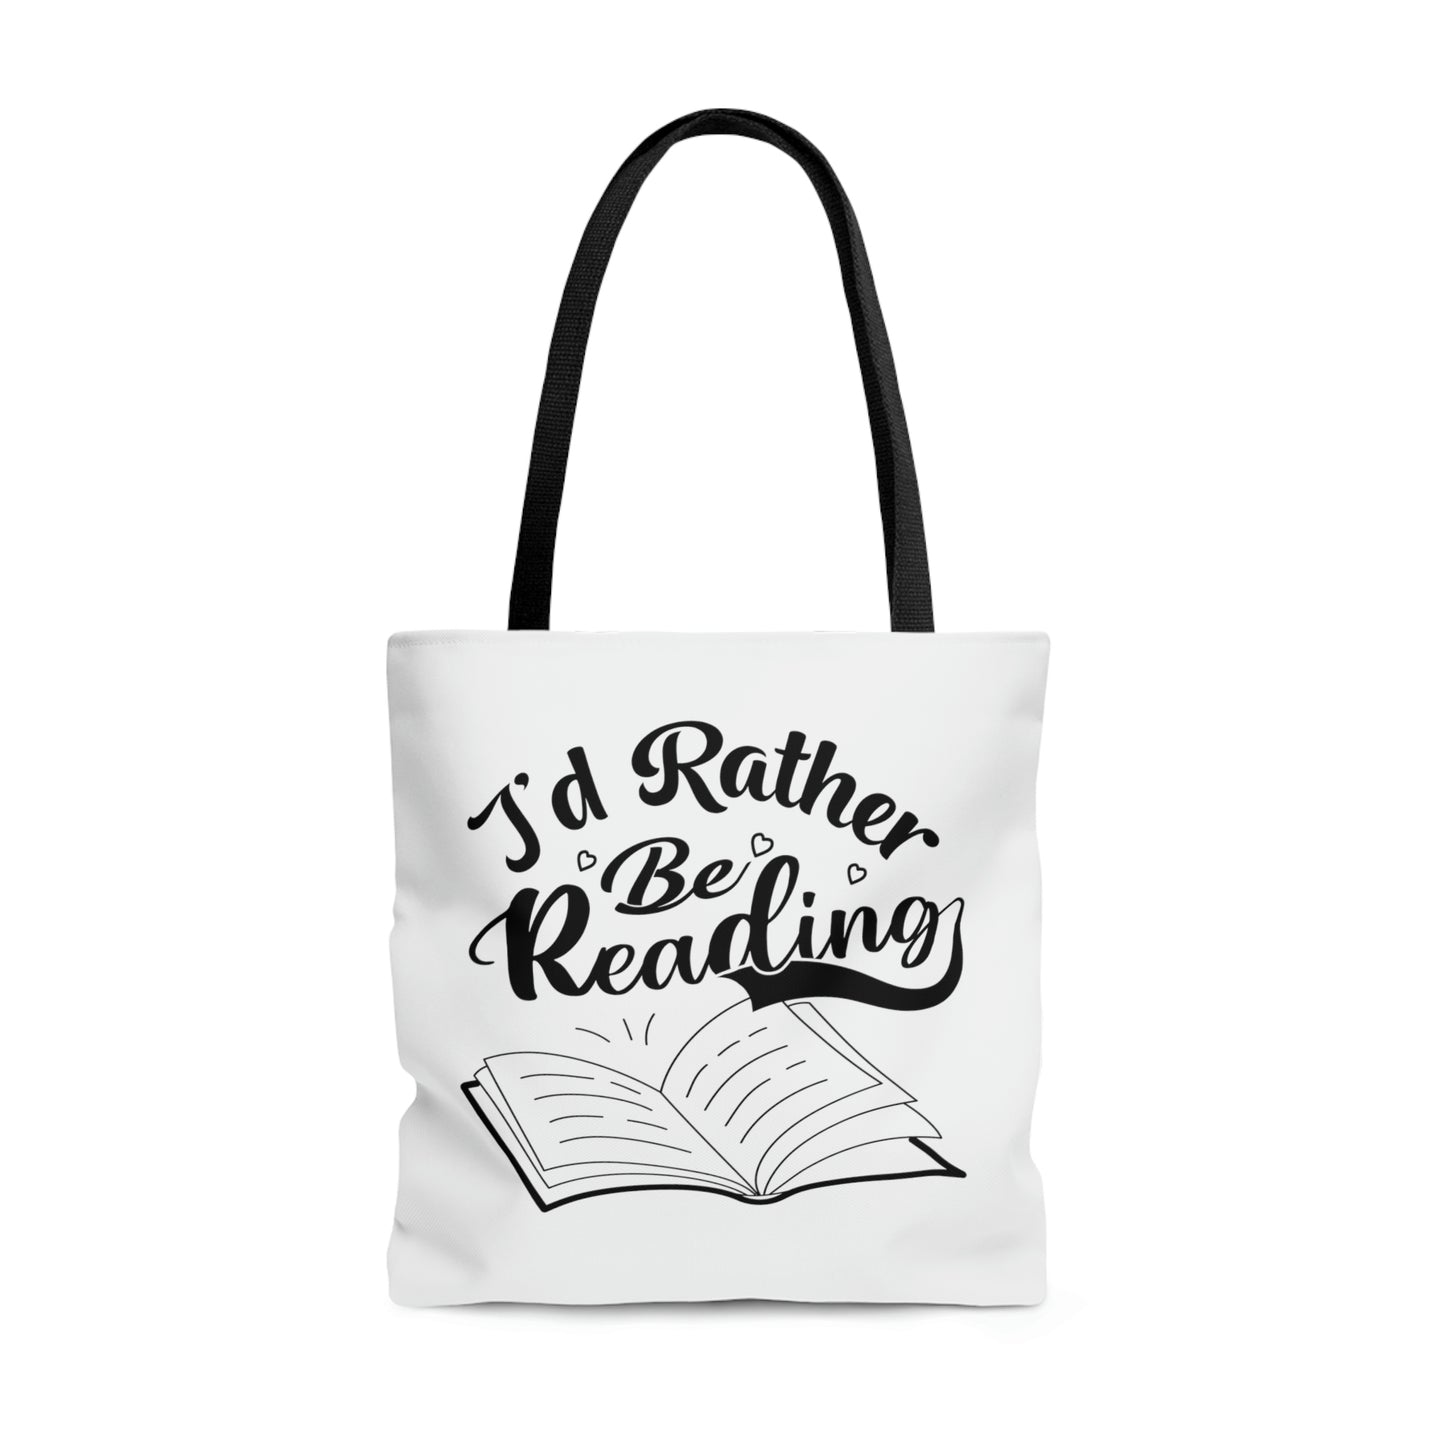 "I'd Rather Be Reading" Large Tote Bag